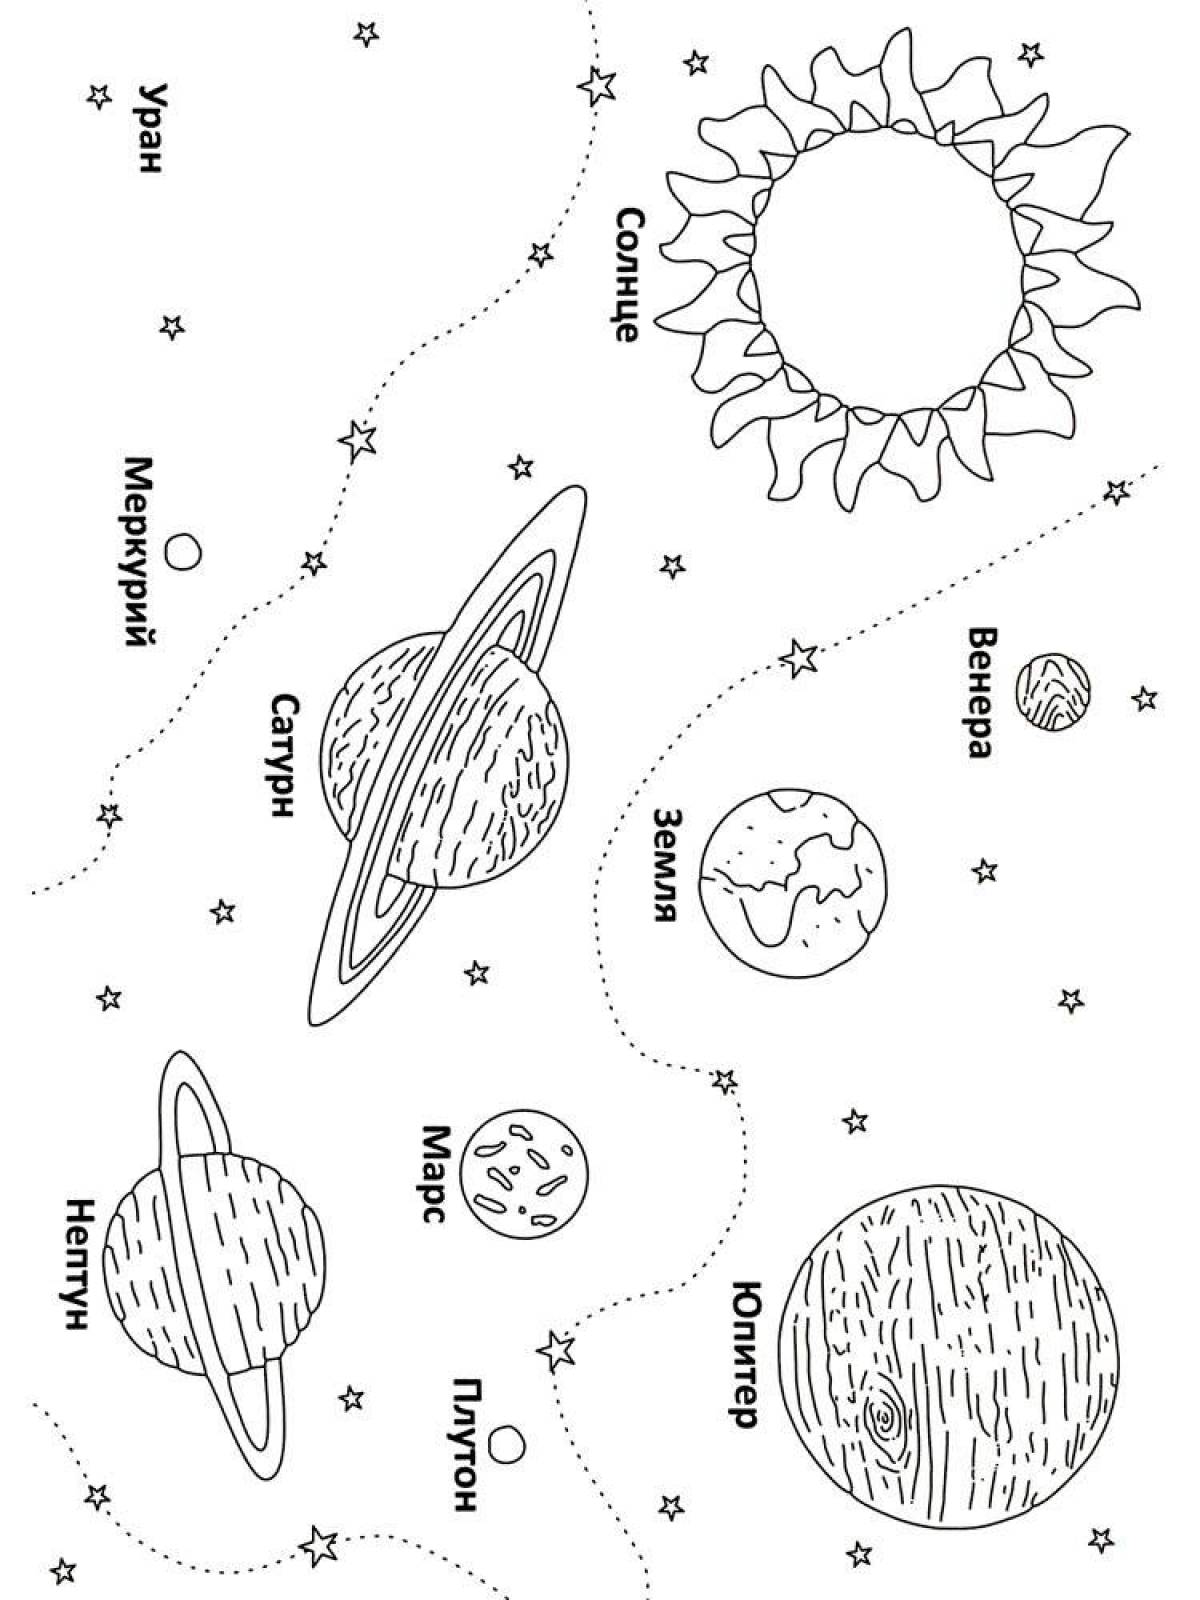 Educational solar system planet coloring book for kids